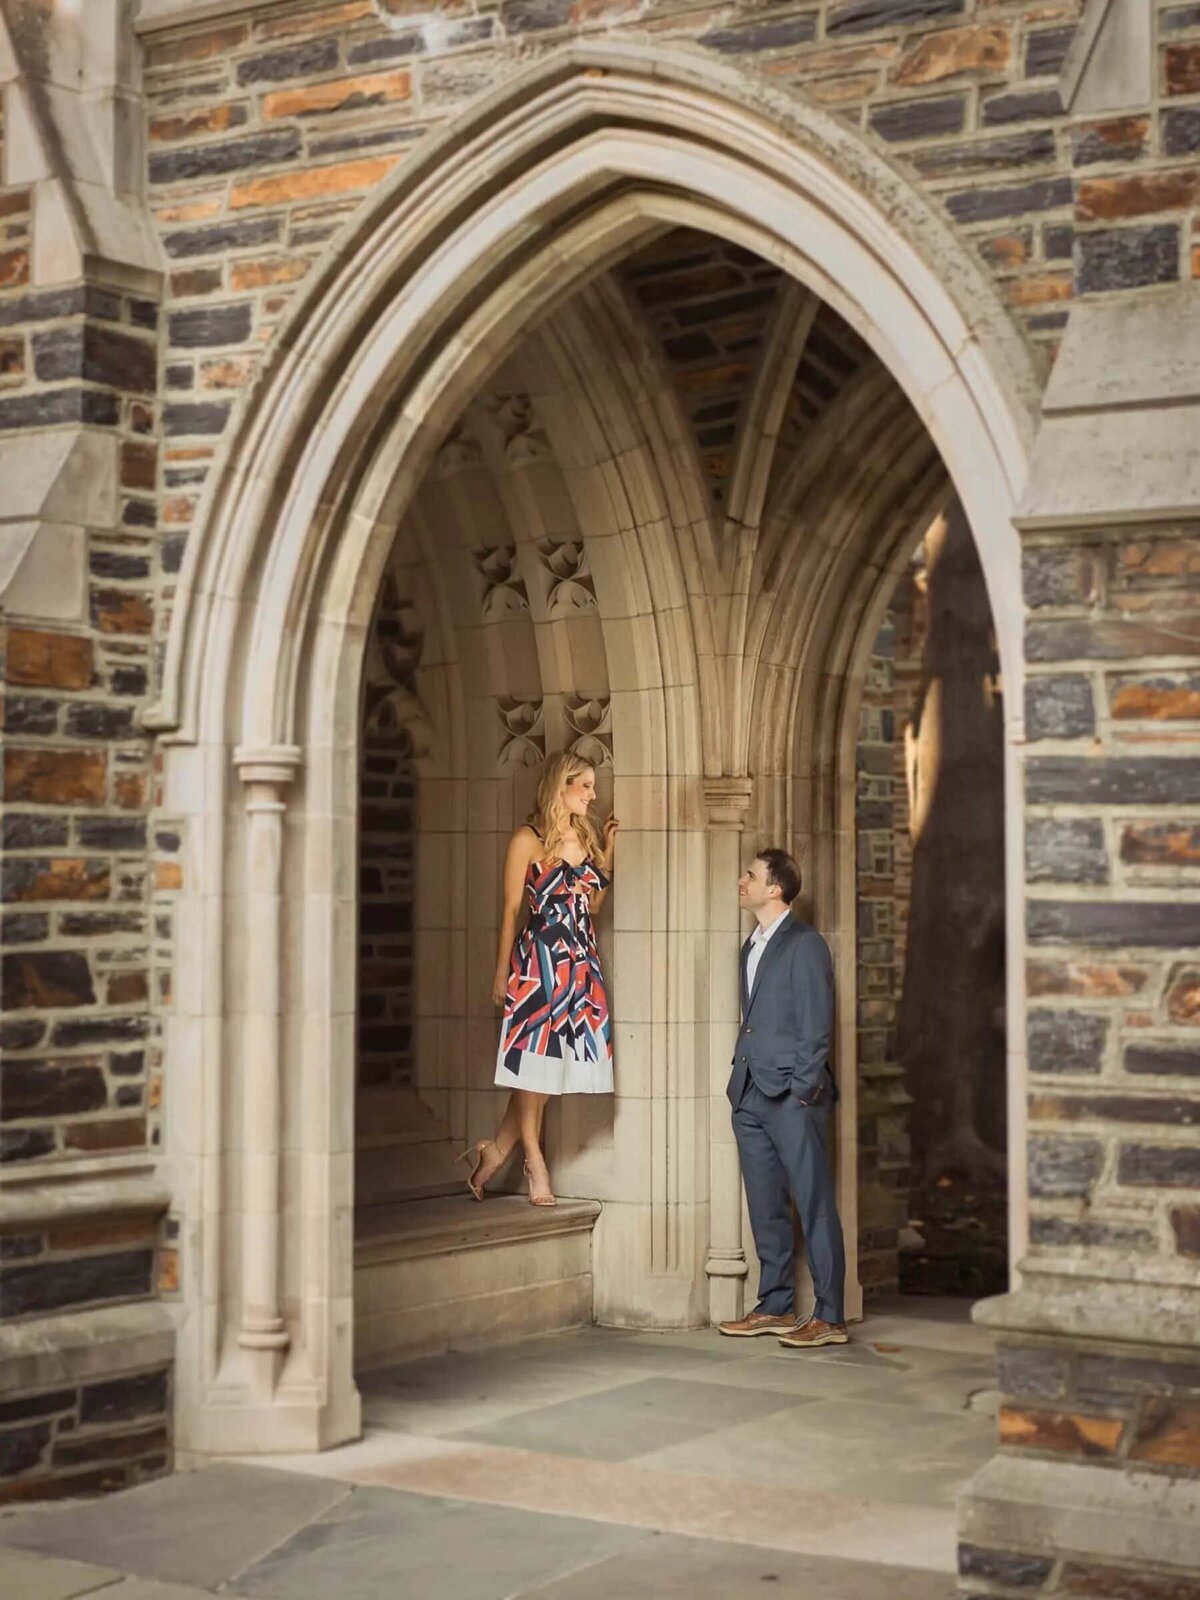 A man in a blue suit looks up at a woman in a patterned dress standing in a gothic archway